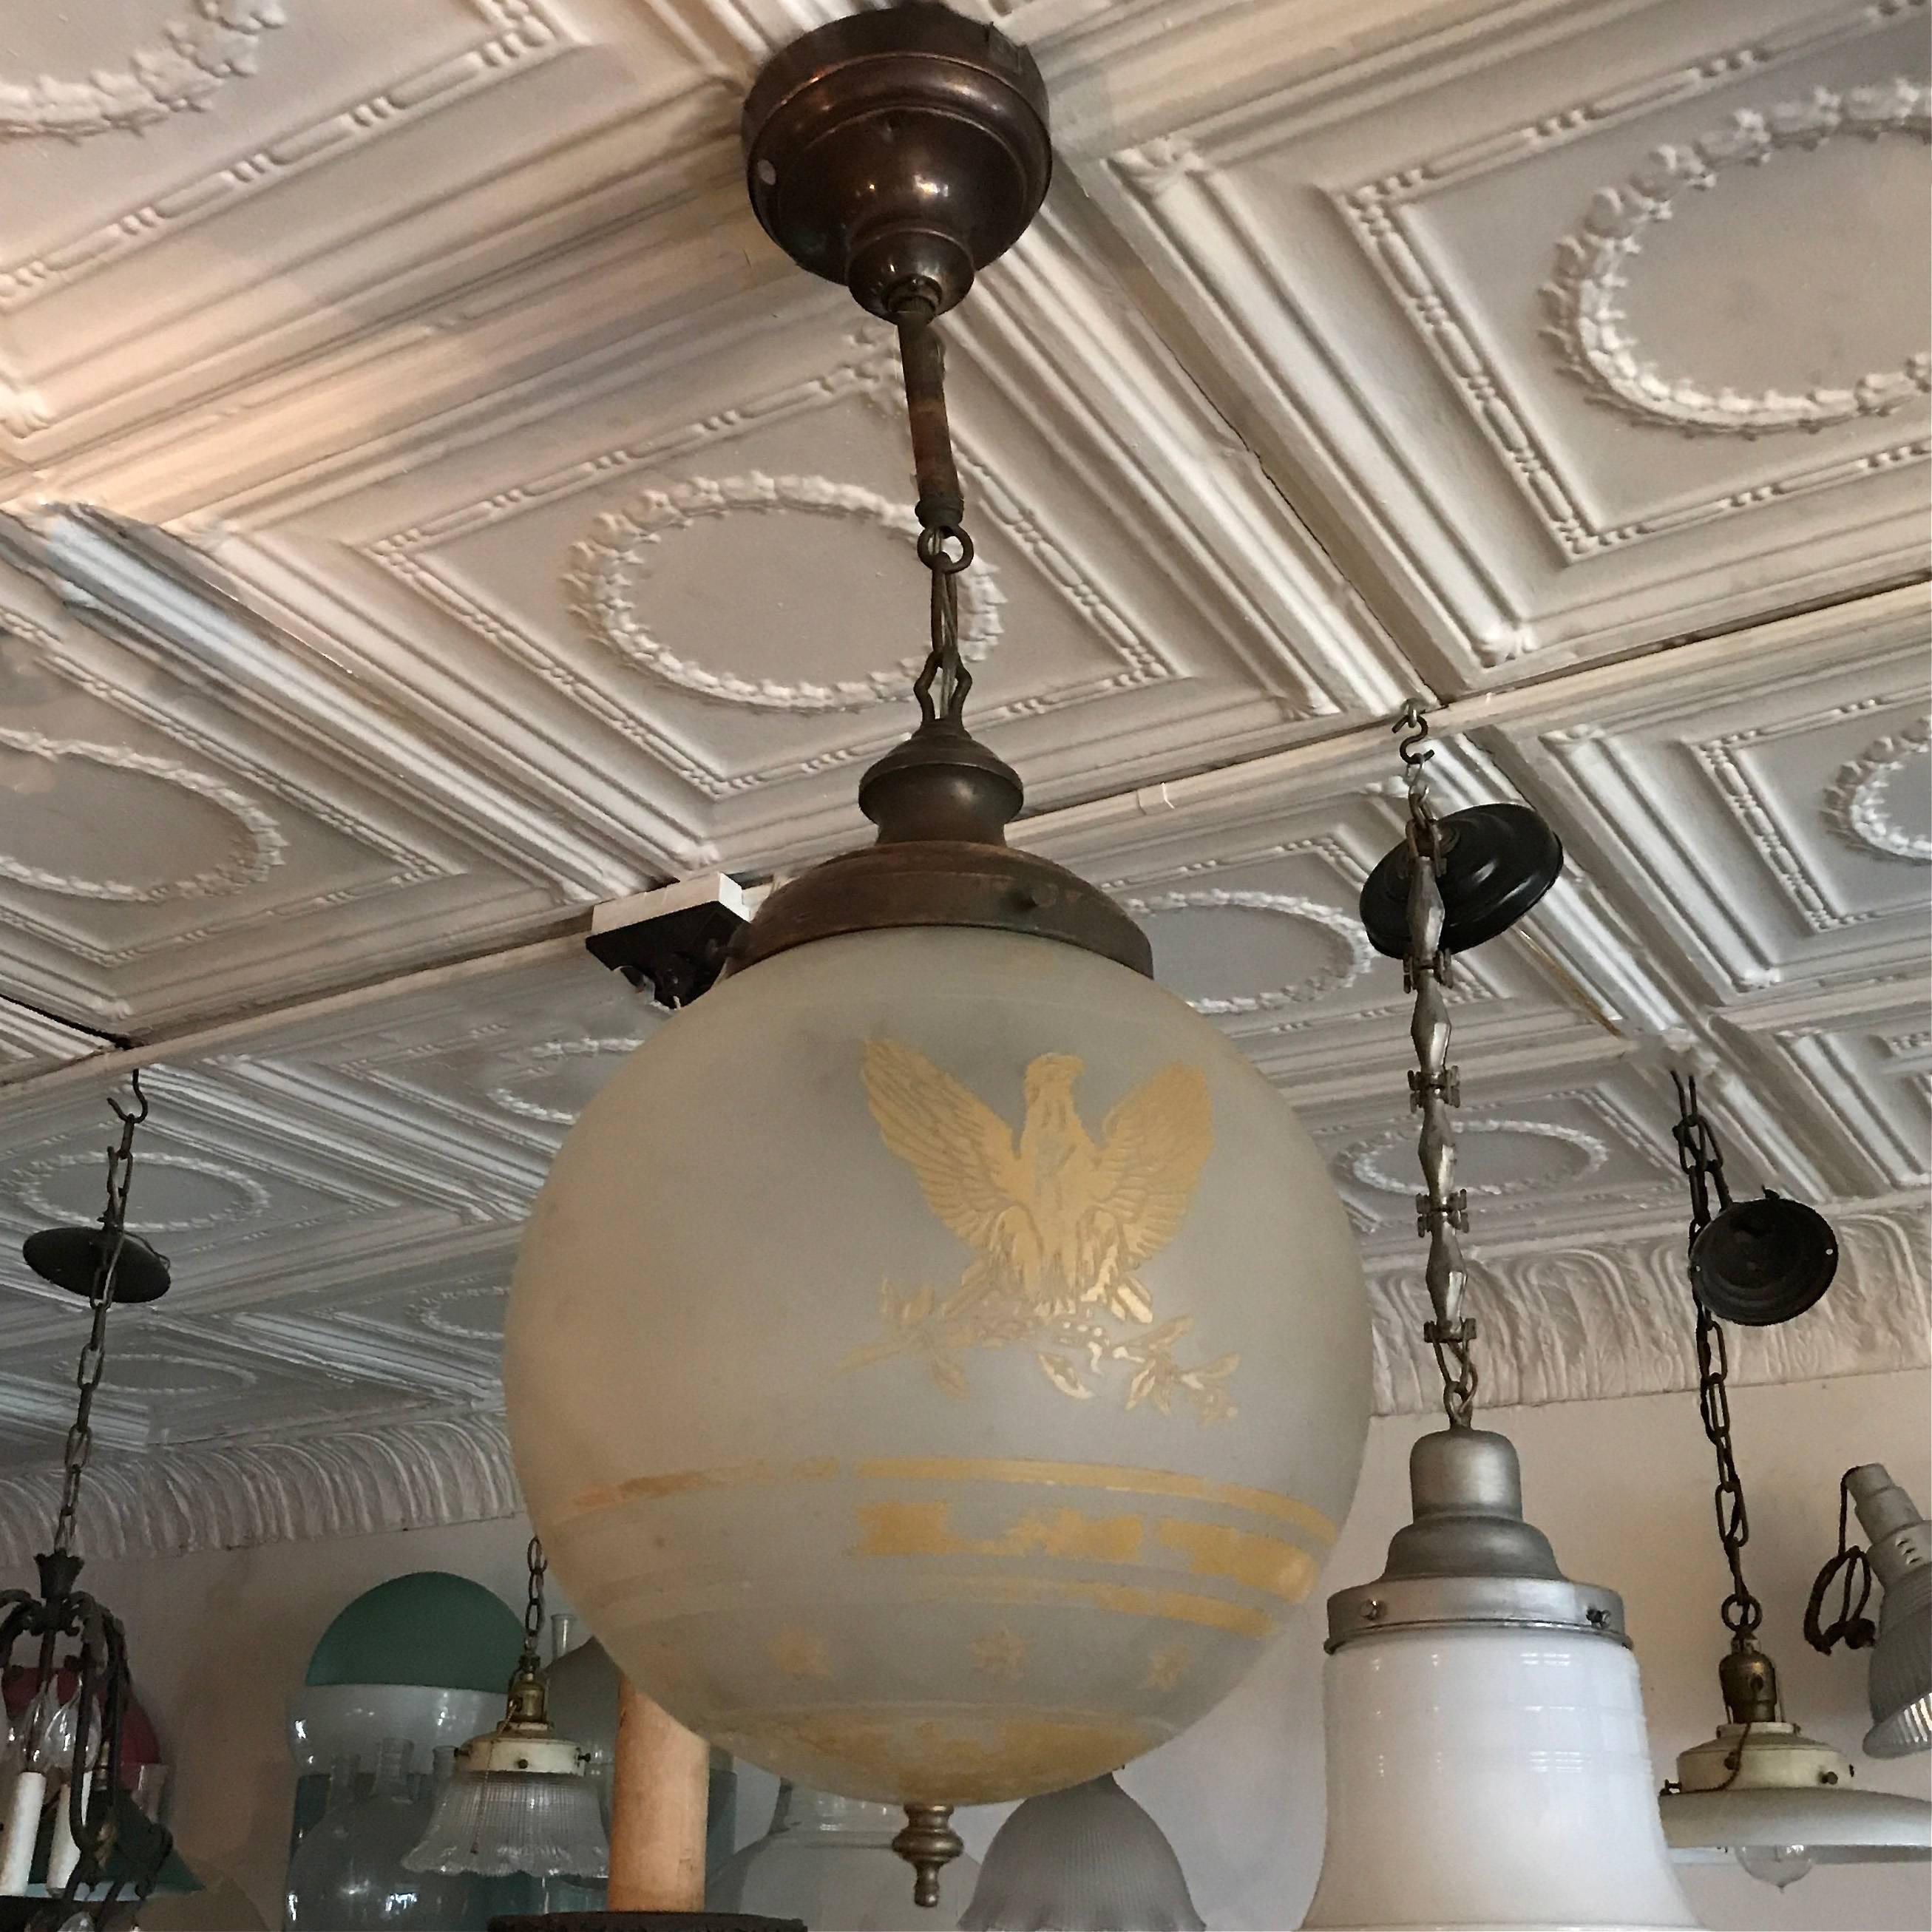 1920s, Federal style, acid etched, frosted glass, globe pendant light depicting American eagle and stars and stripes with brass fitter, chain and canopy. The pendant is newly wired and can accept up to a 200 watt bulb. The fixture is 30